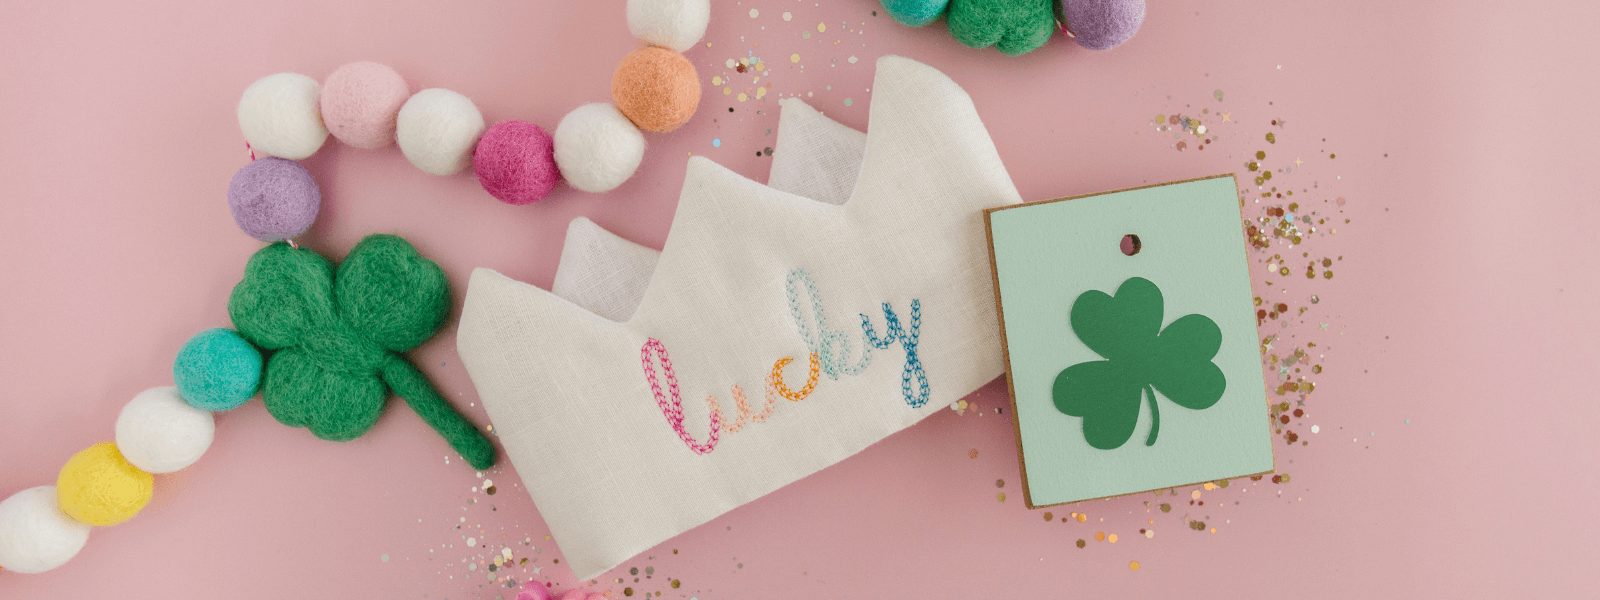 ideas for st patrick's day gifts